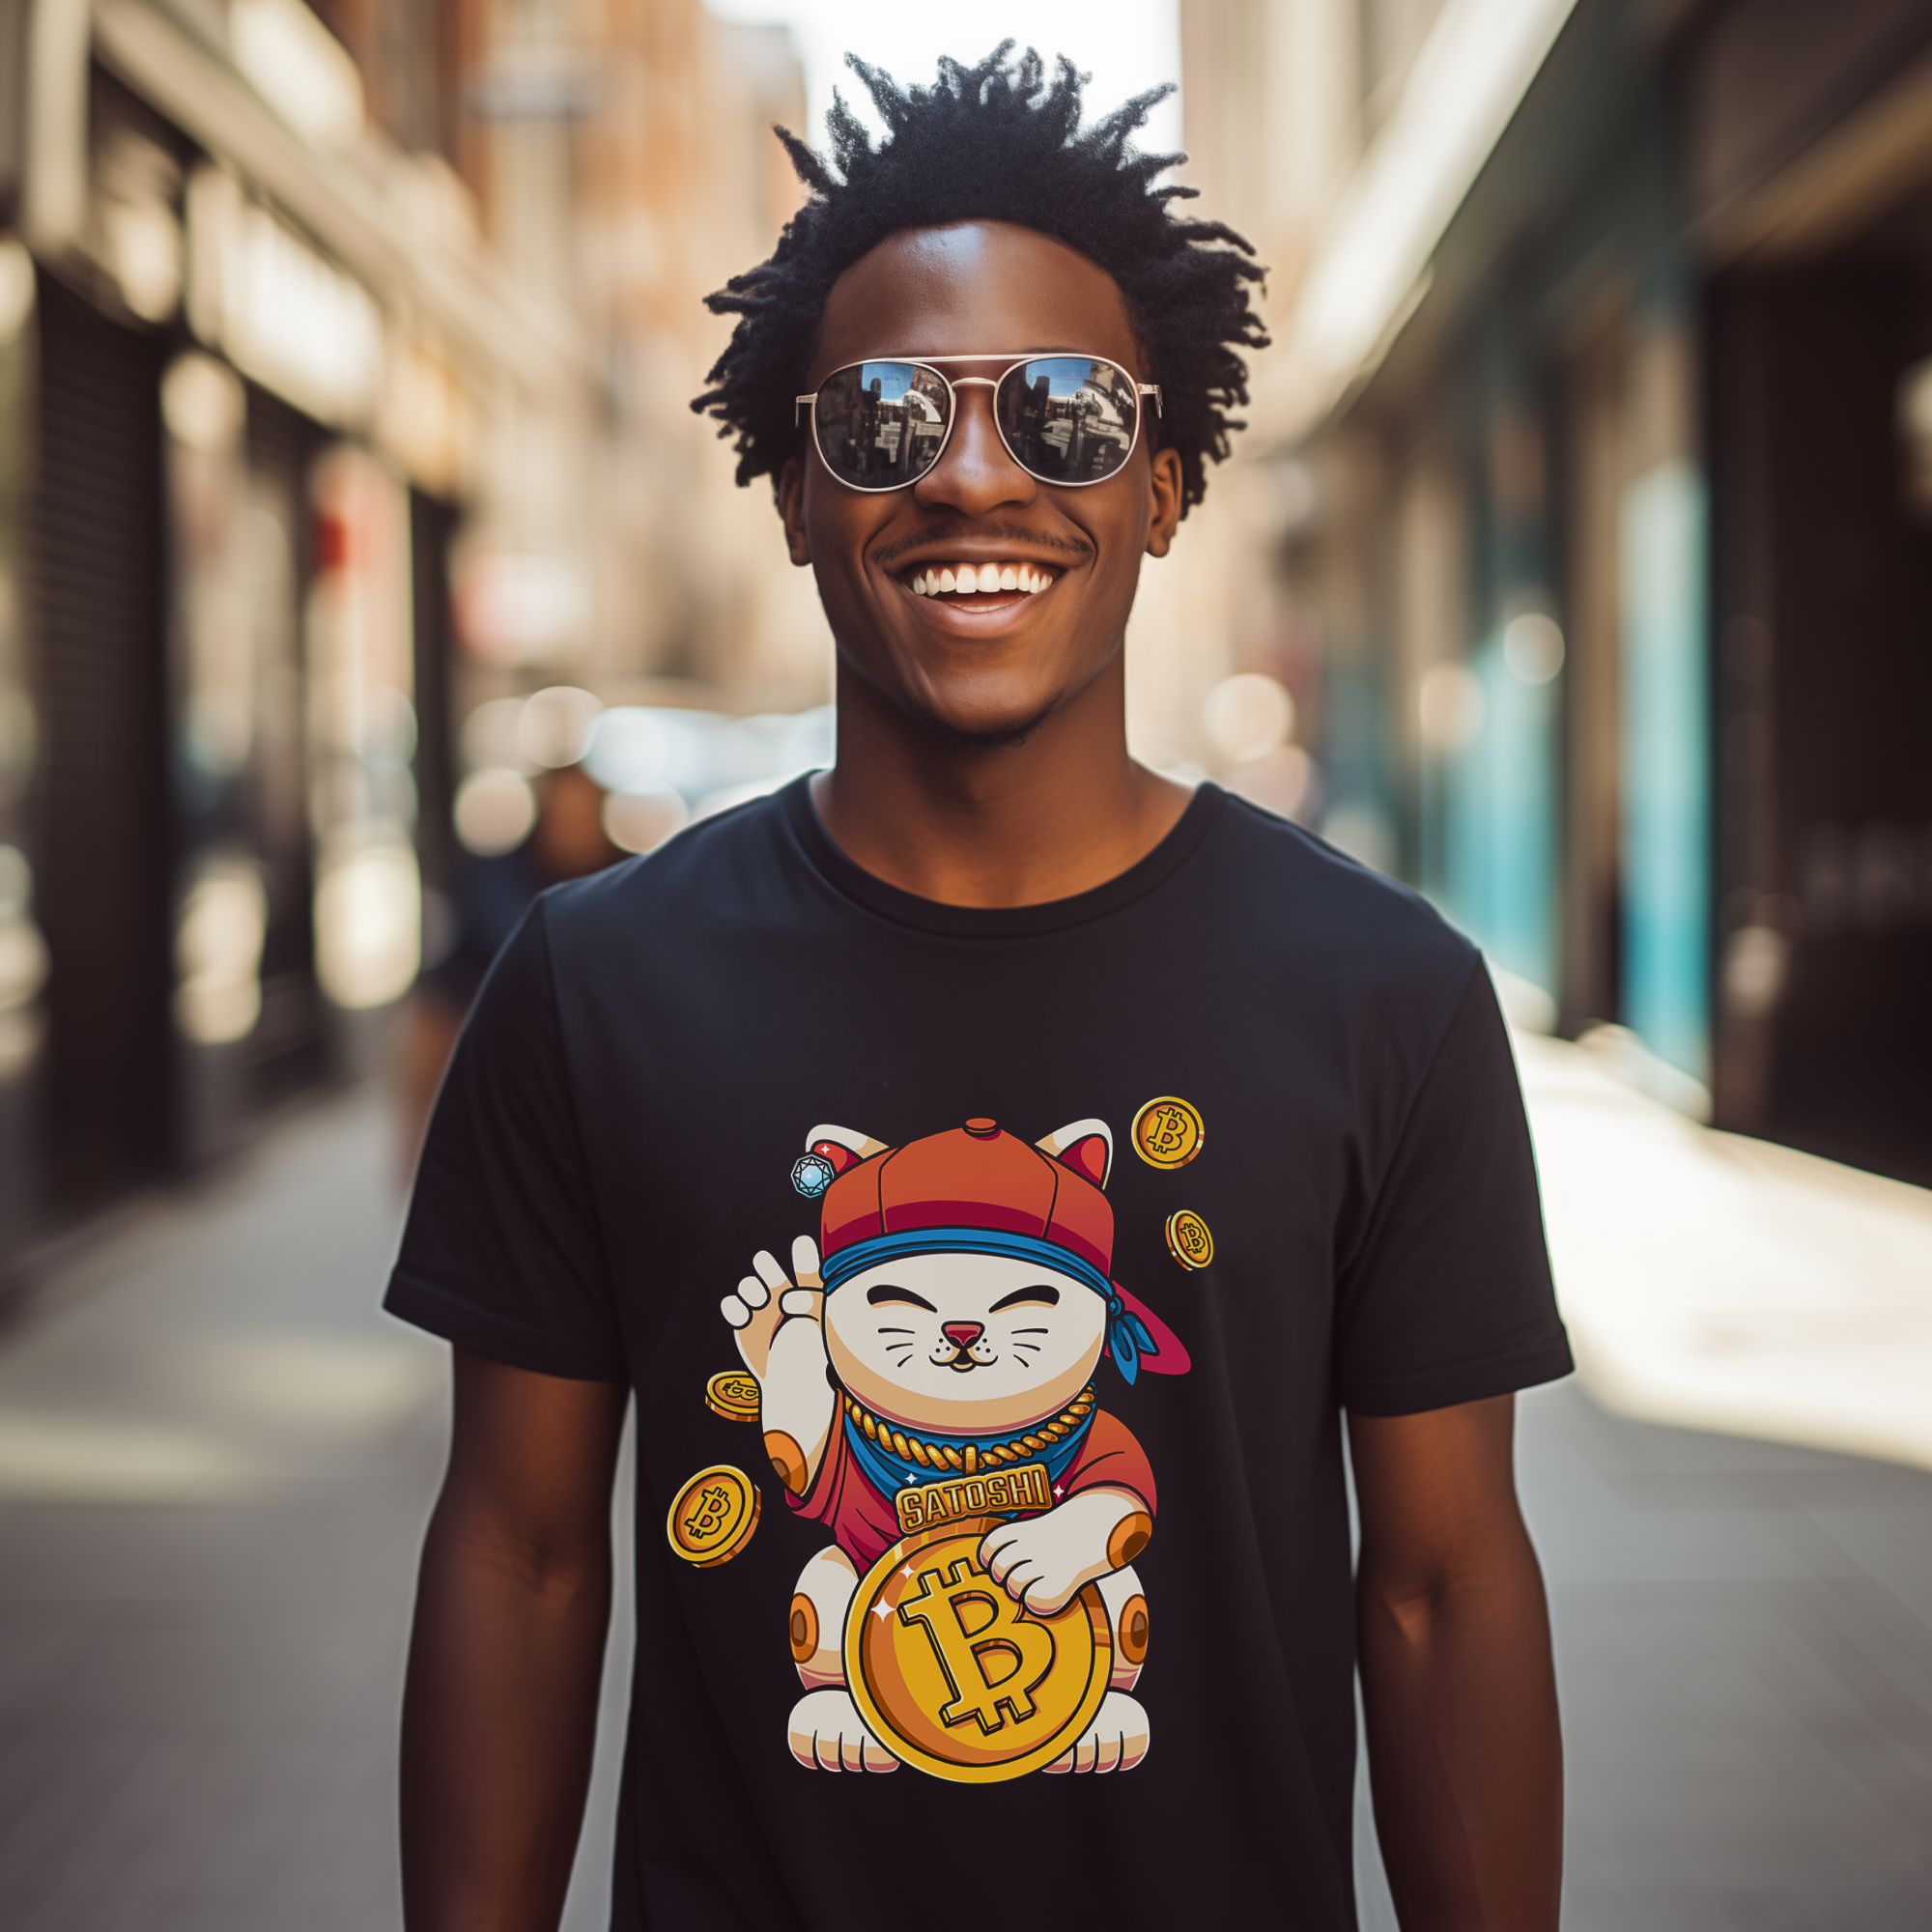 Bitcoin Merchandise - Satoshi Lucky Cat T-Shirt worn by male model (front view).